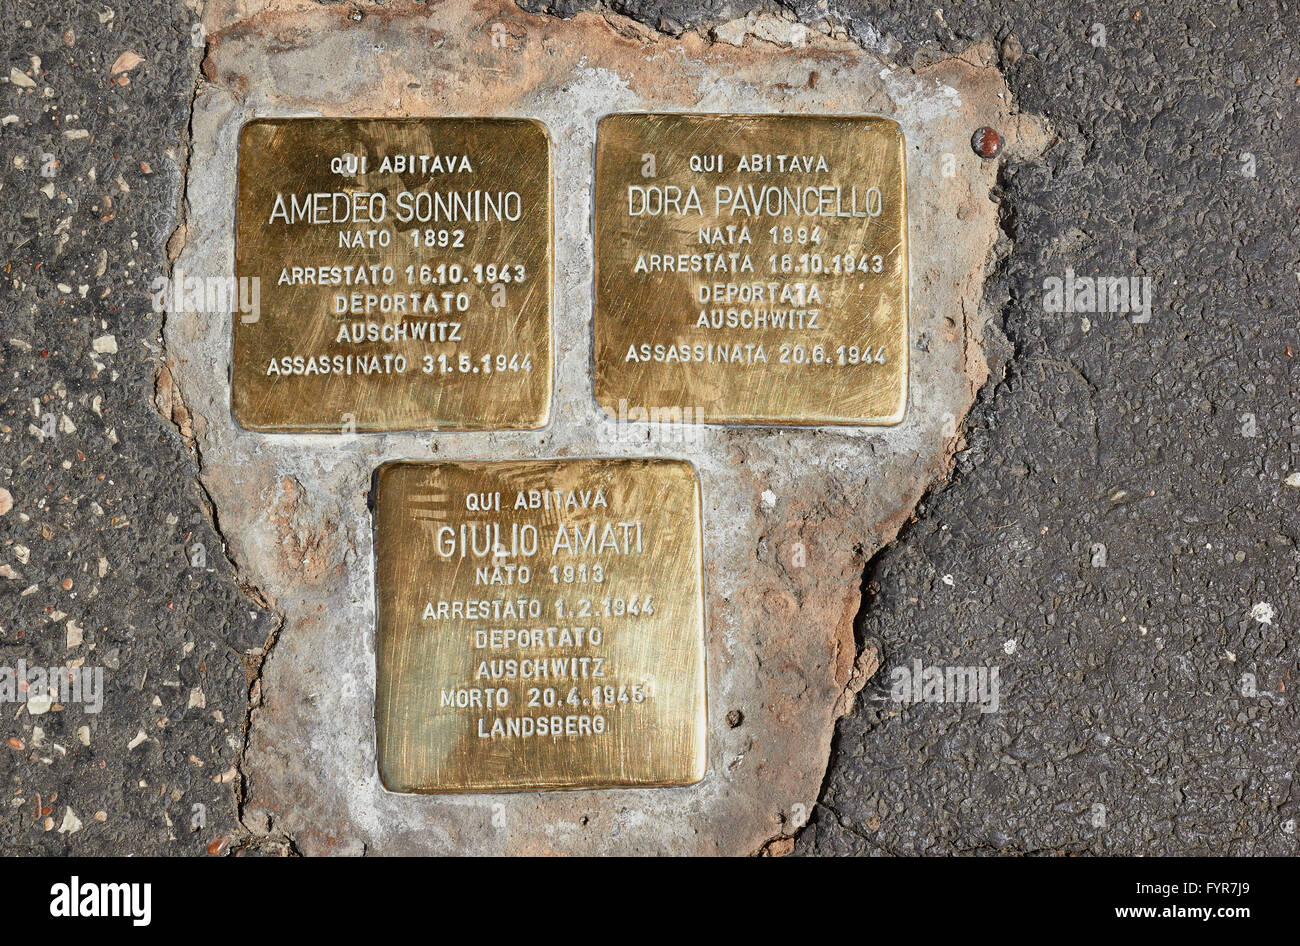 Brass plaques in Via Catalana commemorating Italian Jews that died in World War two Rome Lazio Italy Europe Stock Photo